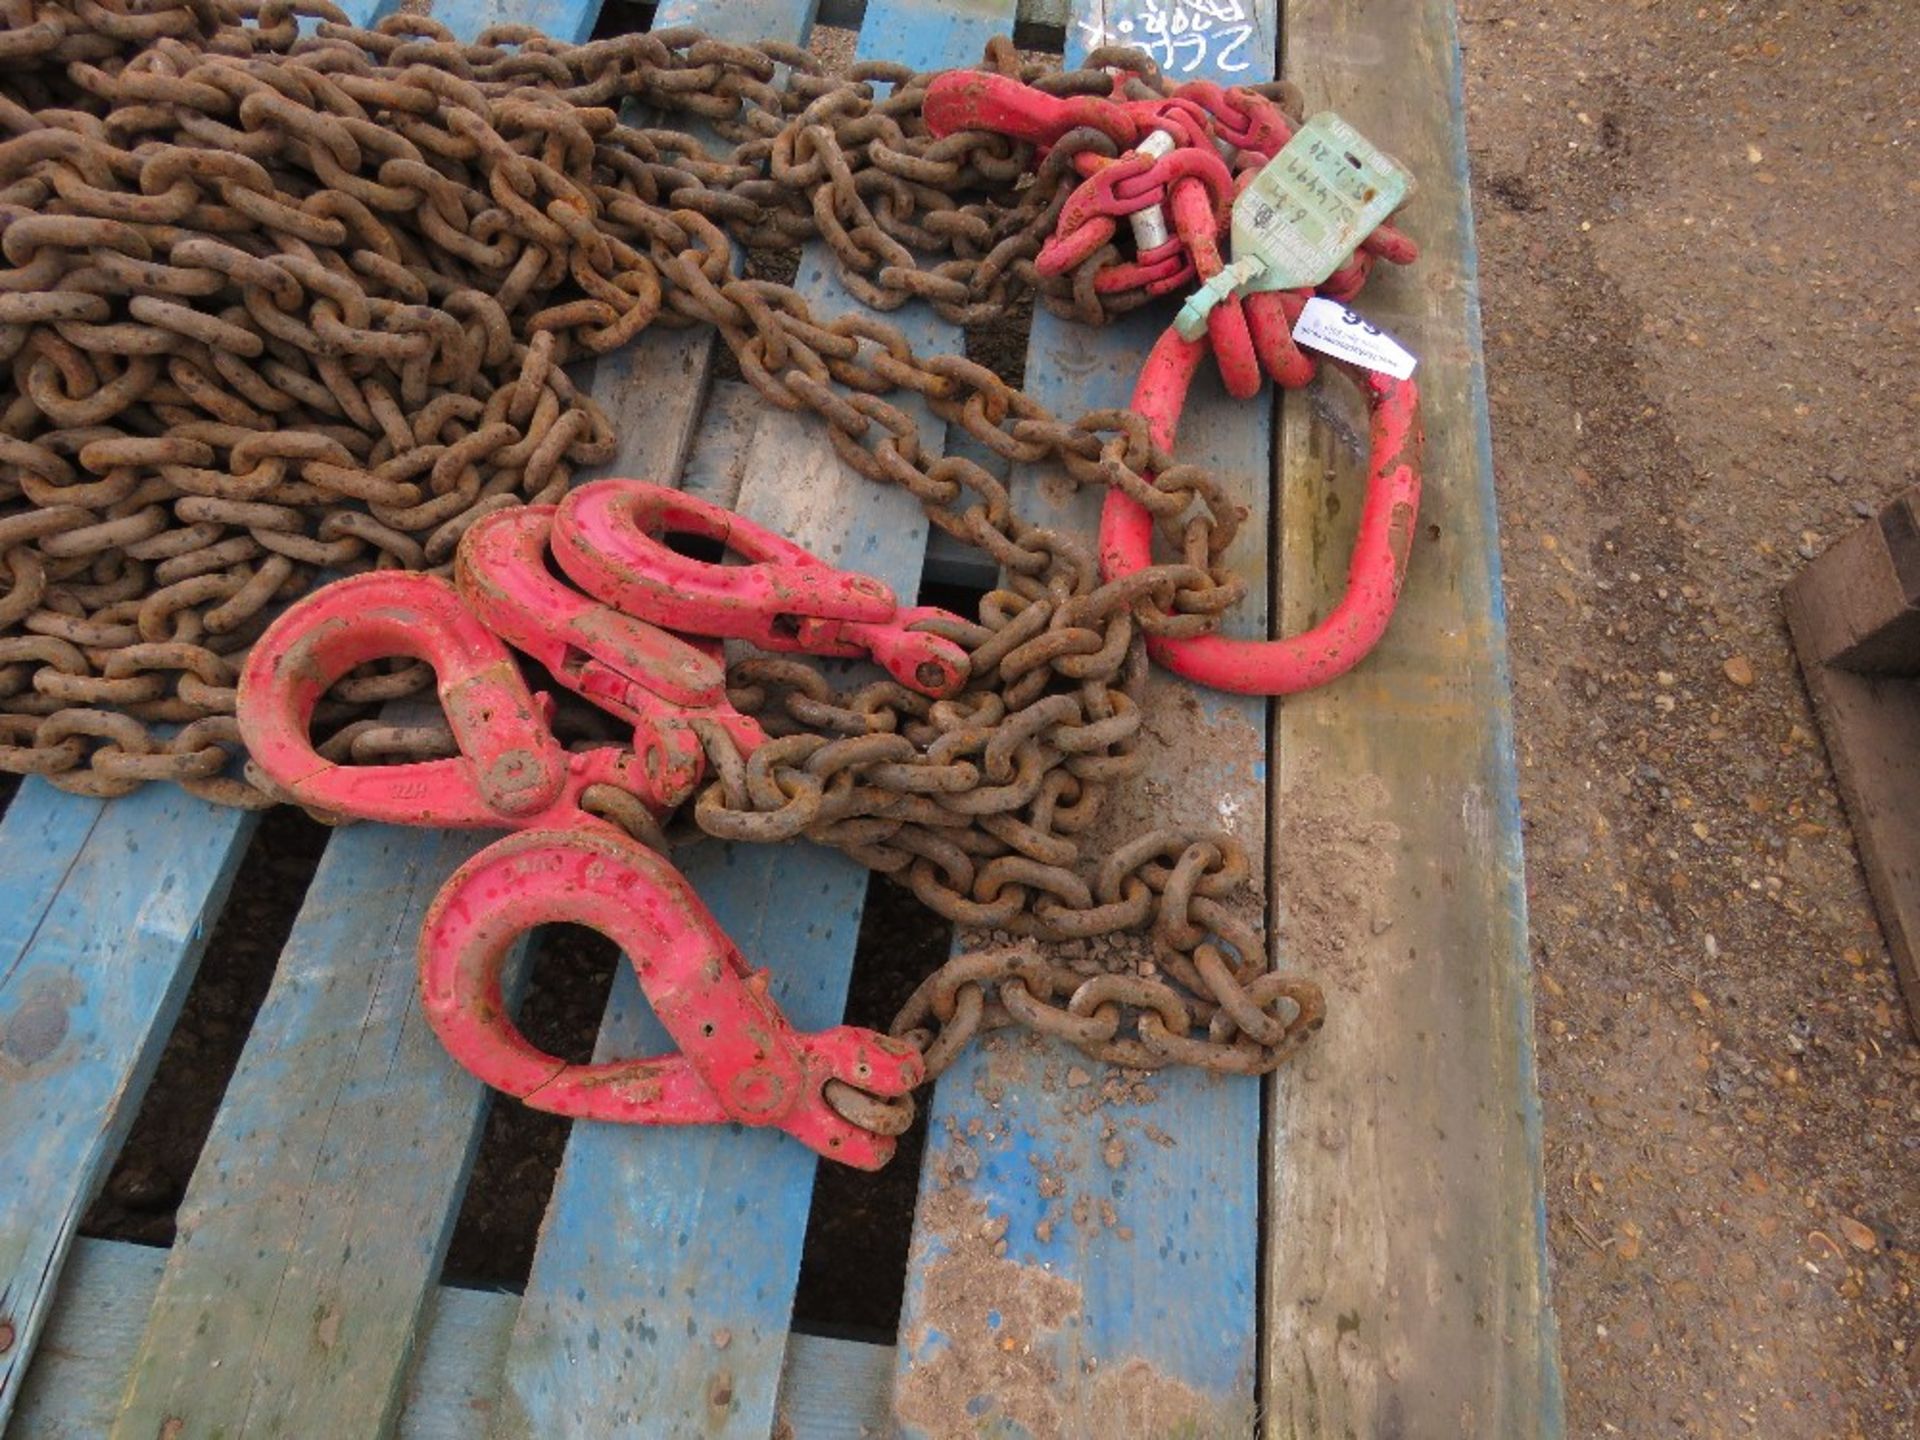 HEAVY DUTY EXTRA LONG SET OF 4 LEGGED LIFTING CHAINS WITH SHORTENERS. 6.7TONNE RATED, 25FT LENGTH AP - Image 3 of 3